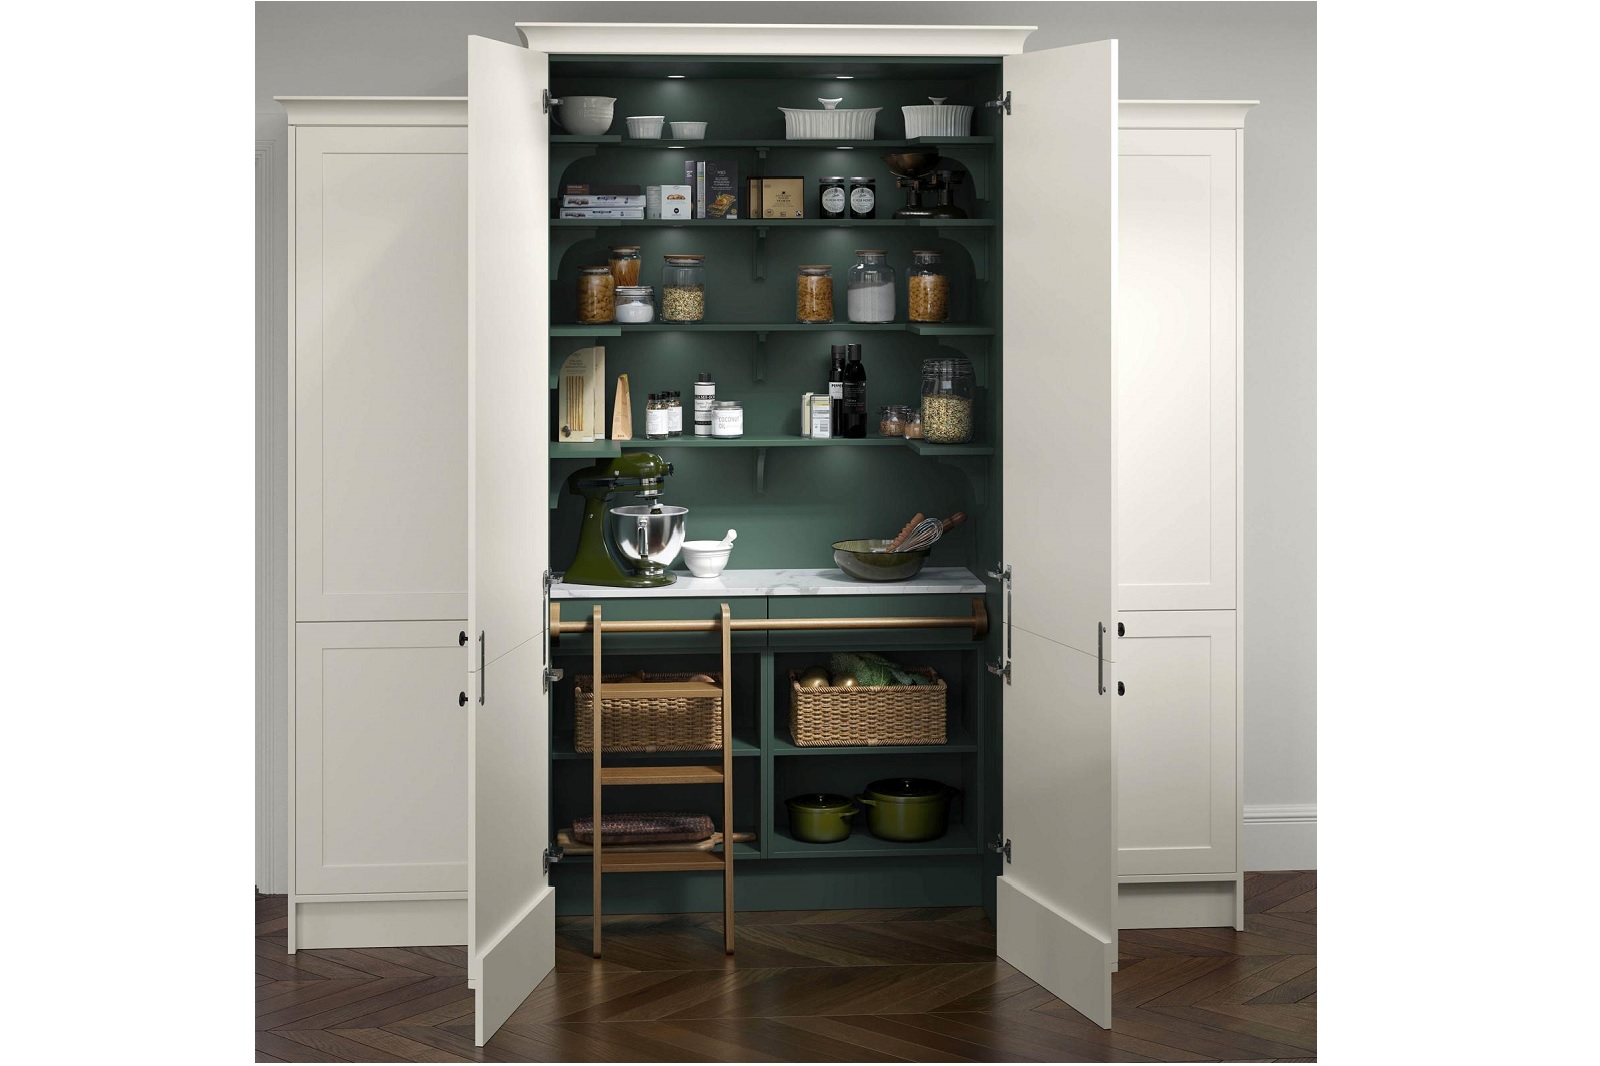 Smooth-finish, slim-frame, shaker-style kitchen painted heritage green and porcelain featuring integrated tall pantry unit with ladder 